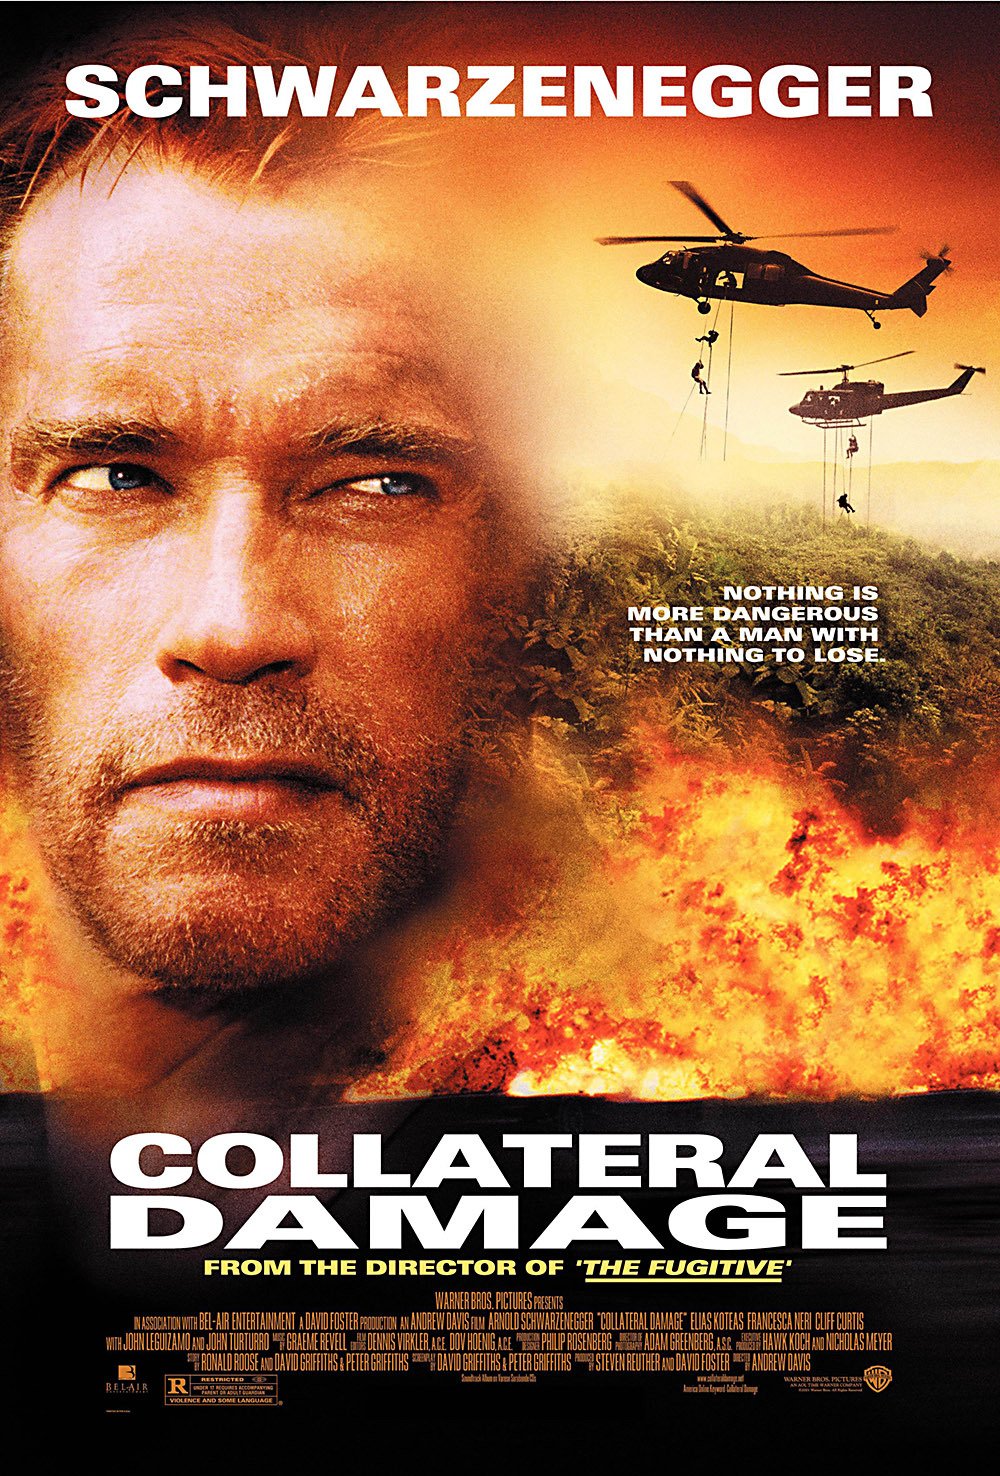 Poster of the movie Collateral Damage